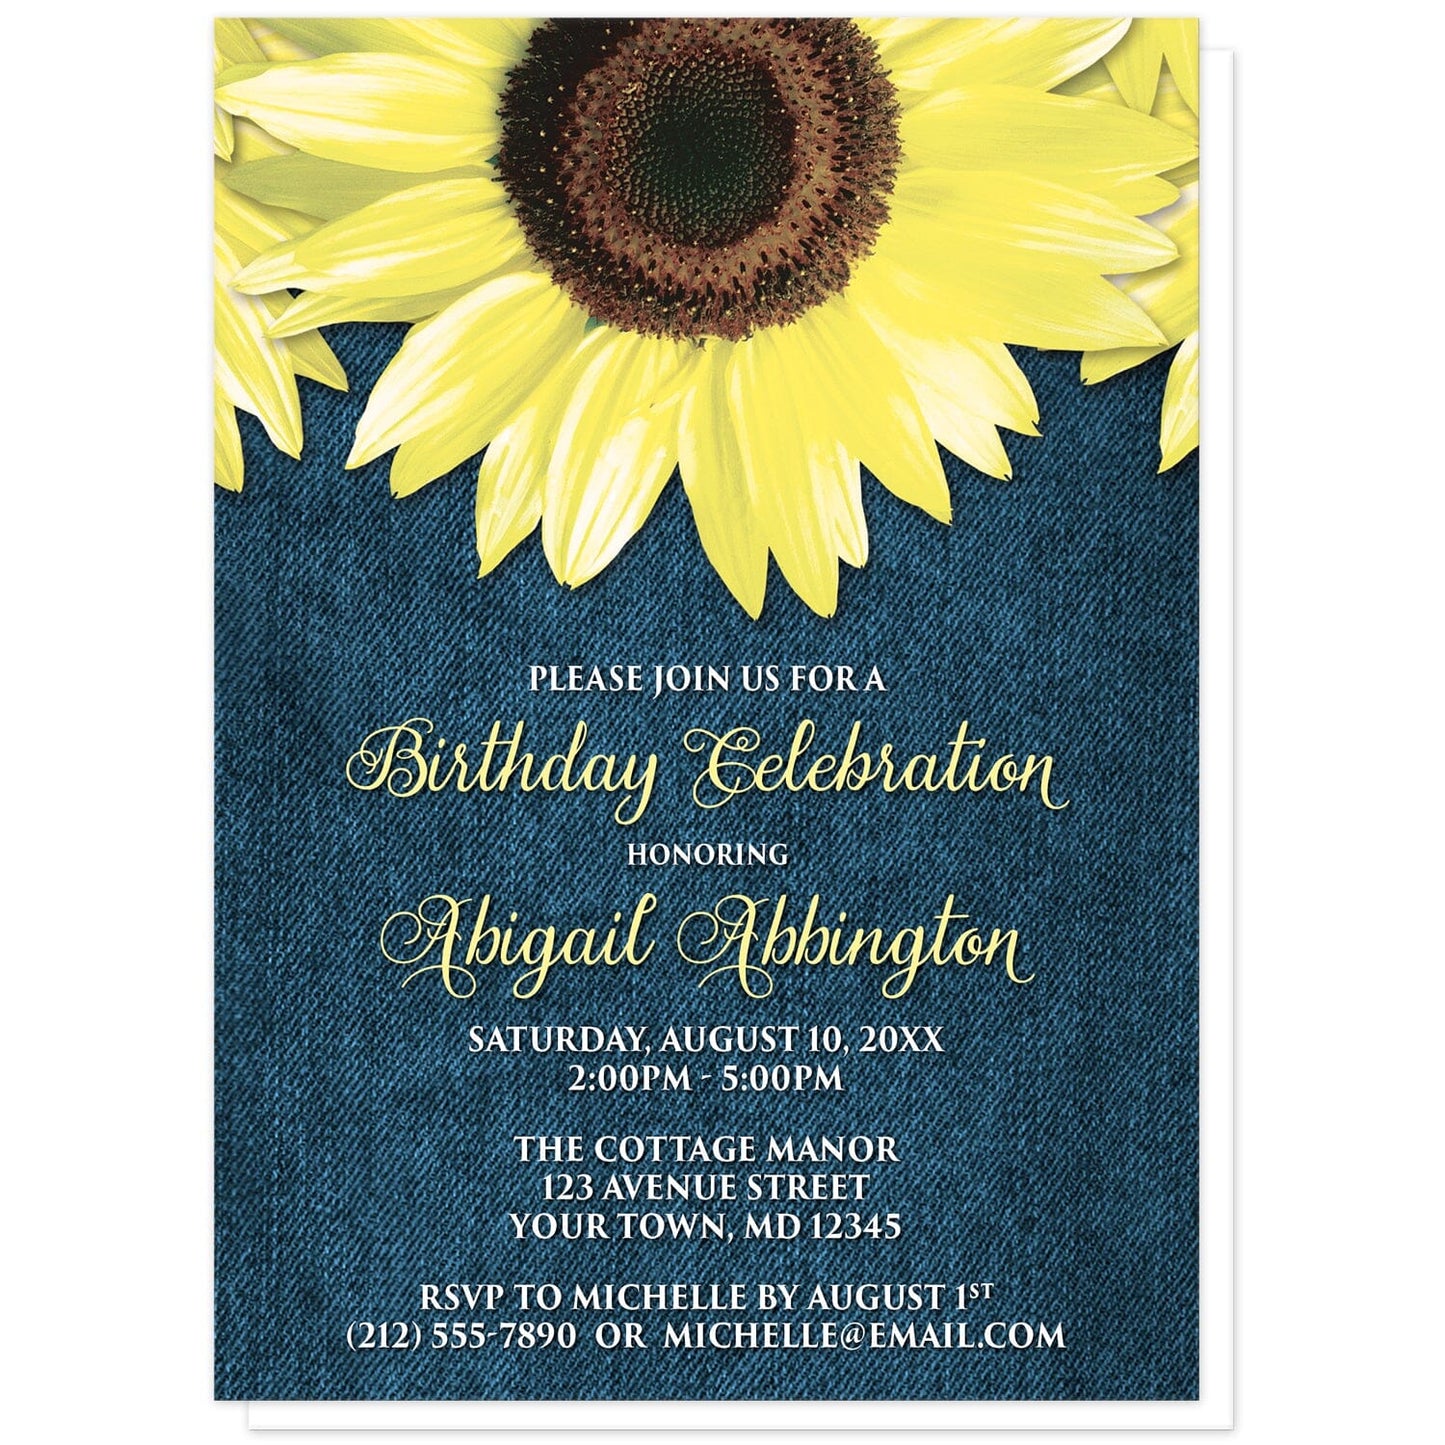 Rustic Sunflower and Denim Birthday Invitations at Artistically Invited. Southern-inspired rustic sunflower and denim birthday invitations designed with large yellow sunflowers along the top over a country blue denim design. Your personalized birthday celebration details are custom printed in yellow and white over the blue denim background below the pretty sunflowers. 